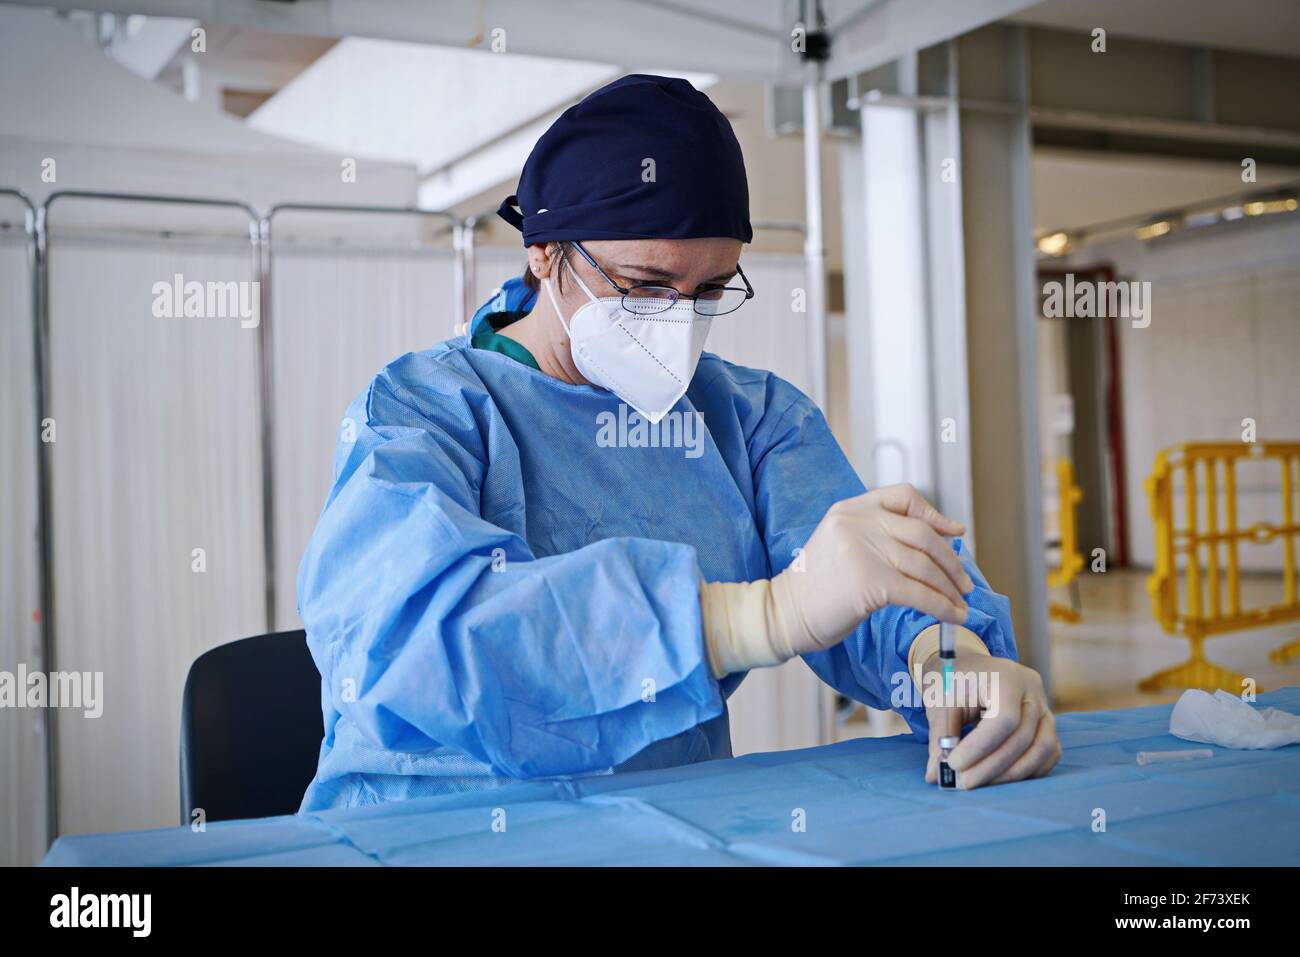 Preparation of syringes with dose of vaccine ready for inoculation in Italian vaccination centre. Turin, Italy - April 2021 Stock Photo